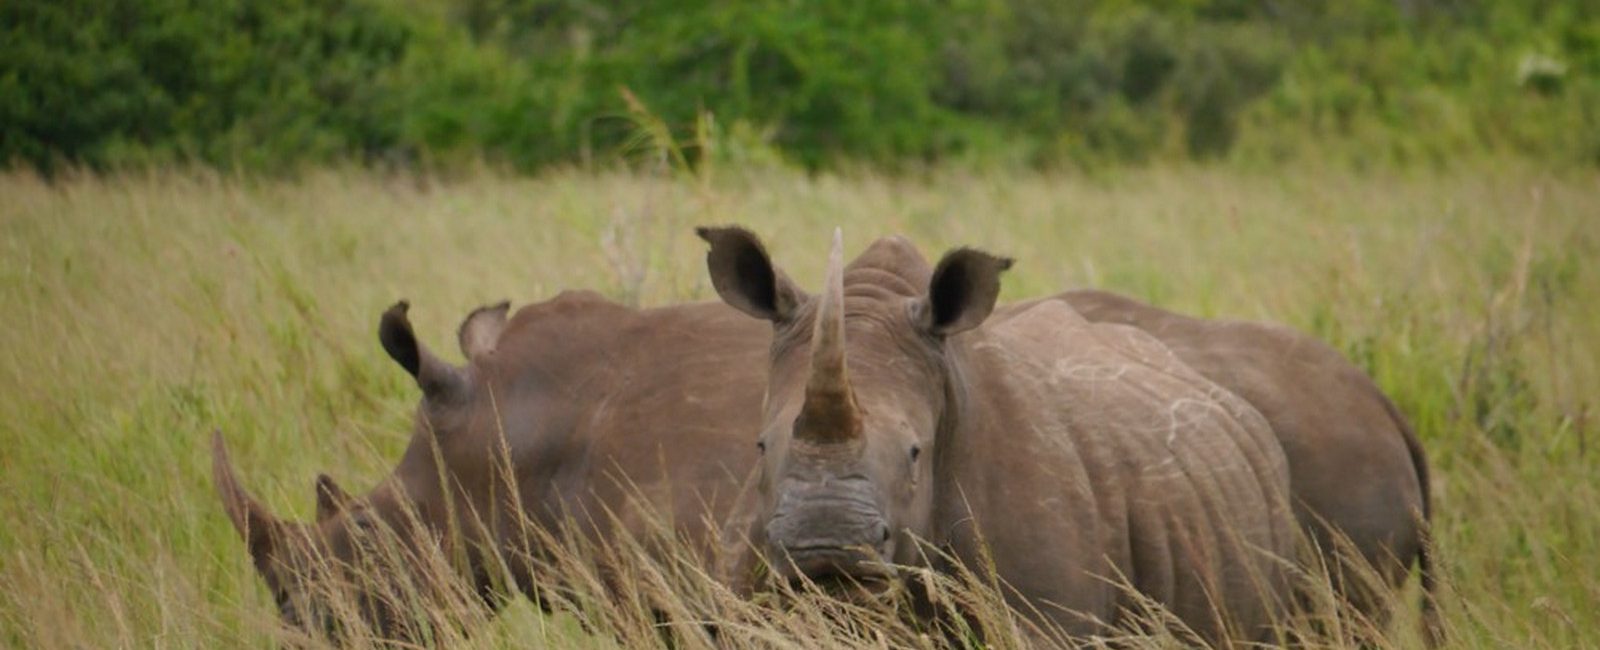 Two white rhinos looking straight into the camera, South Africa.